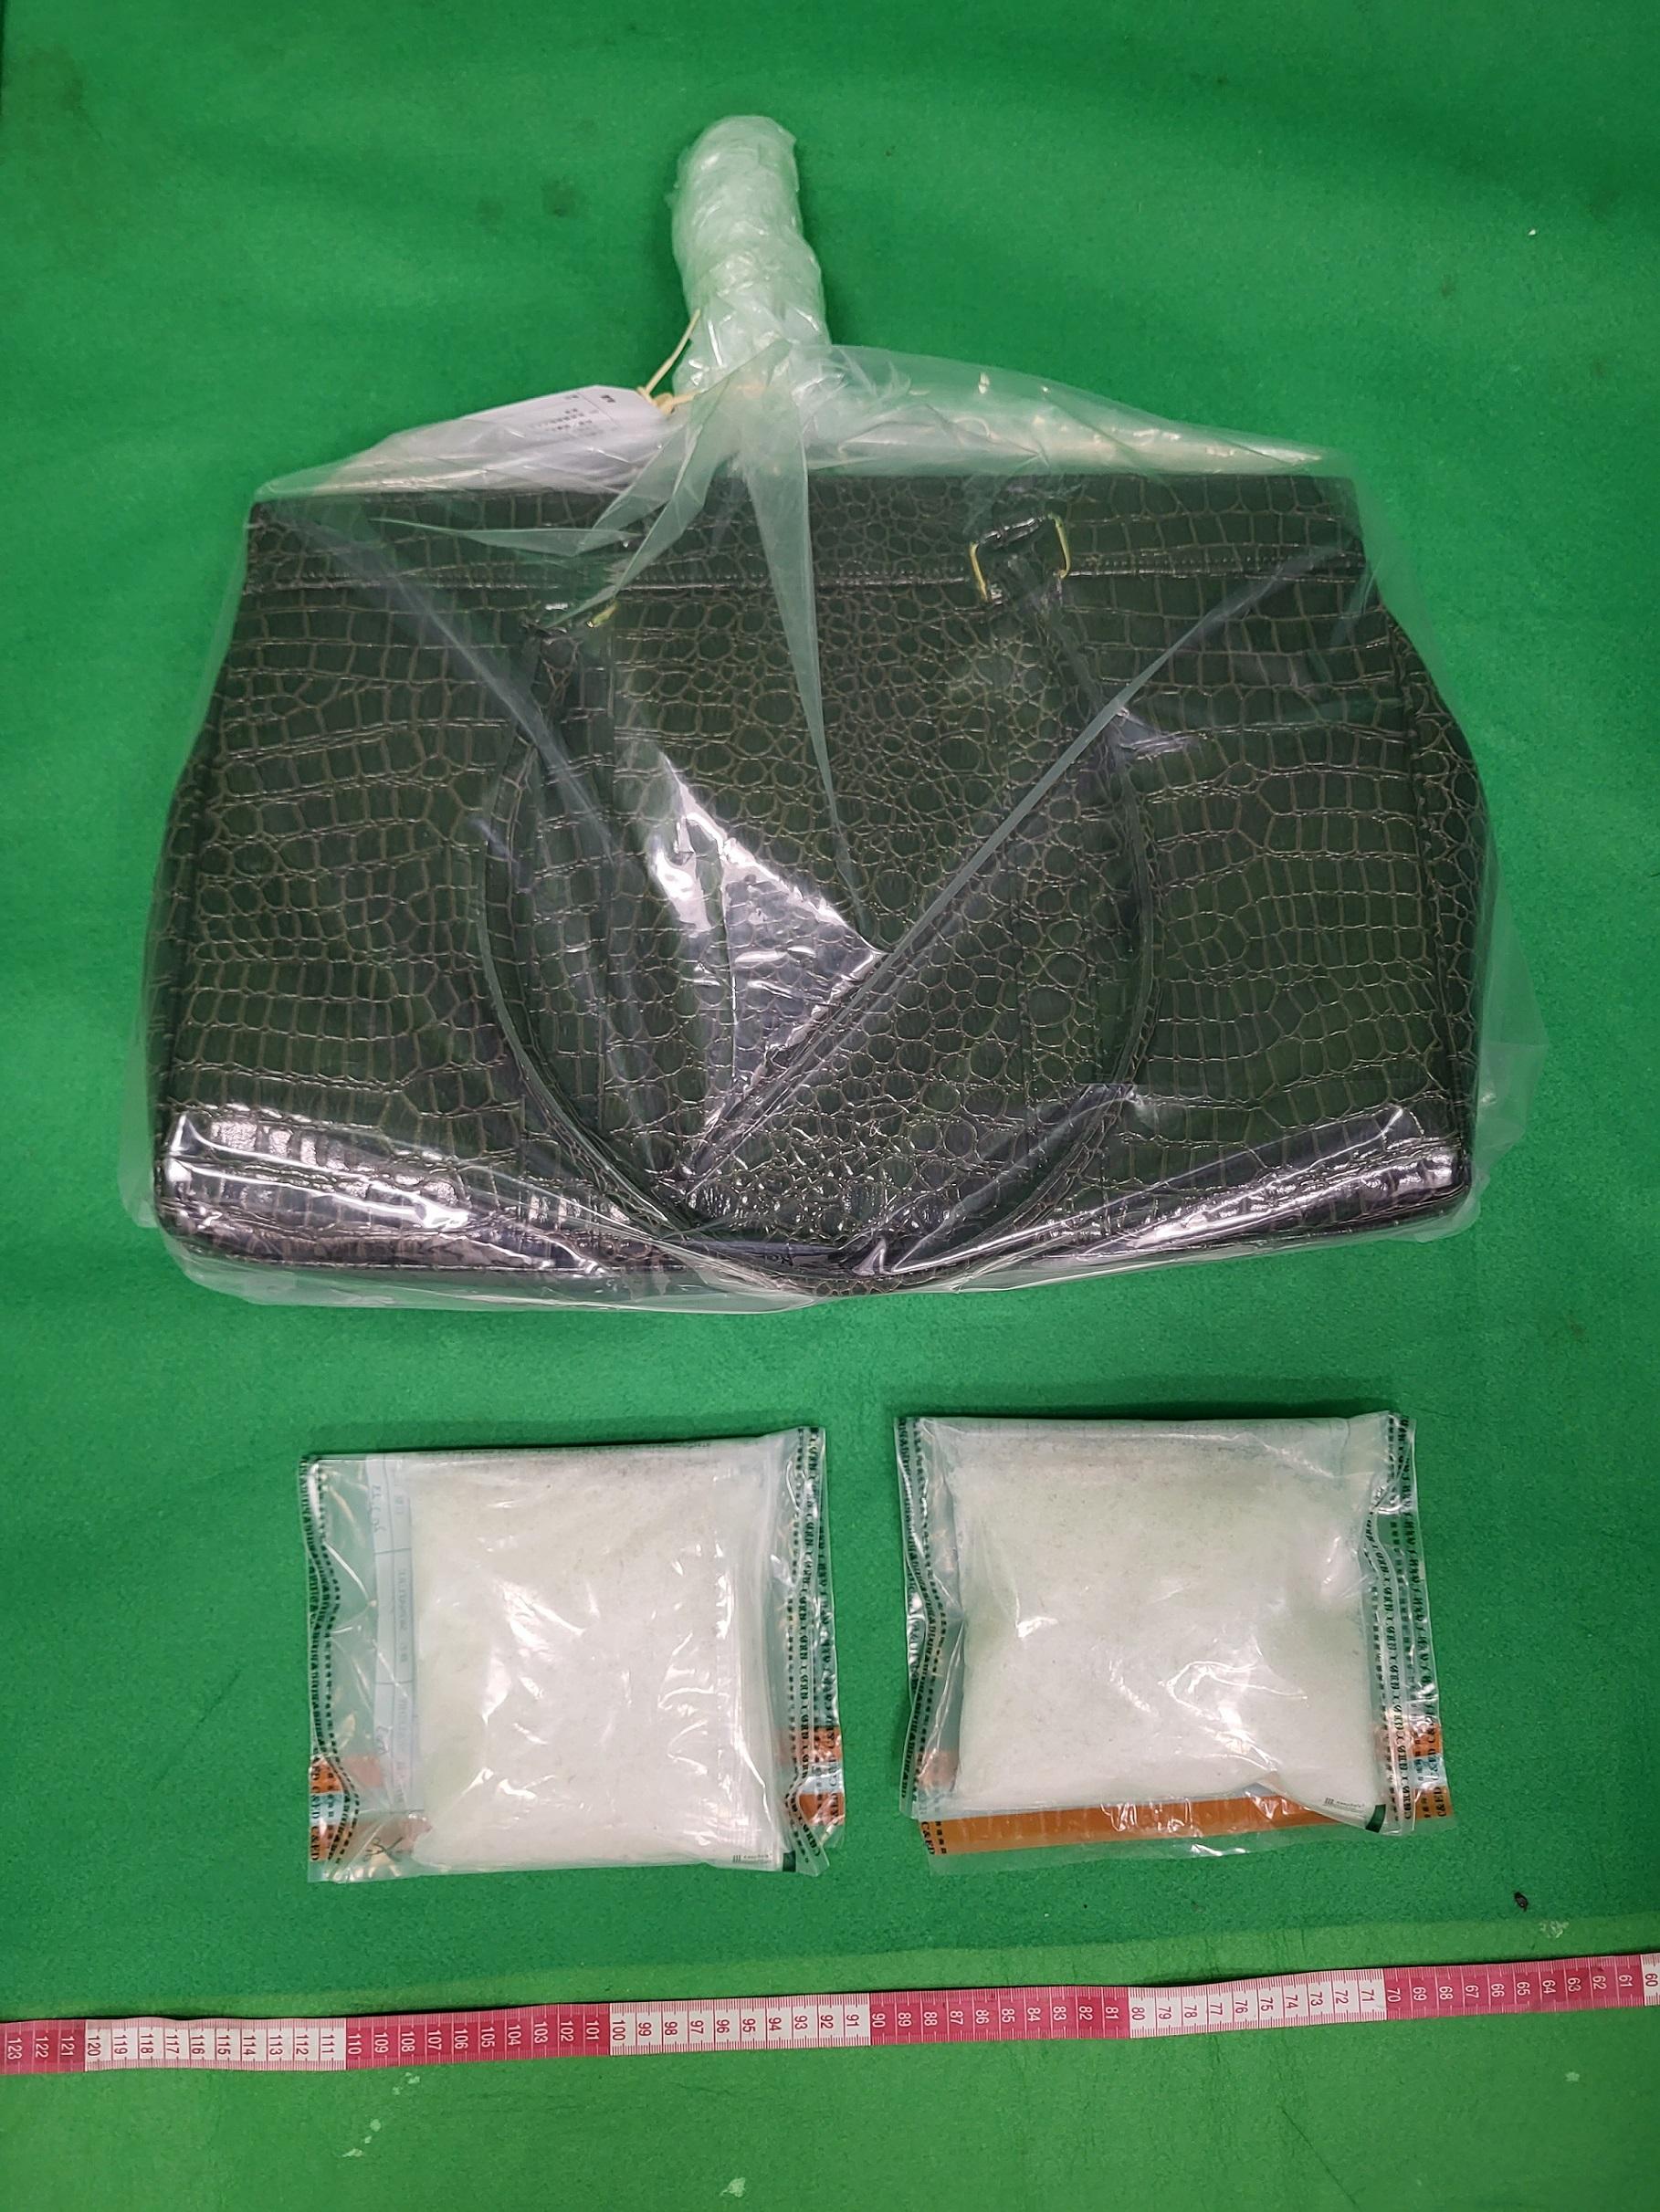 Hong Kong Customs yesterday (February 19) detected a passenger drug trafficking case at Hong Kong International Airport and seized about 780 grams of suspected methamphetamine with an estimated market value of about $440,000. An incoming woman was arrested. Photo shows the suspected methamphetamine seized, with the leather handbag carried and used by the woman to conceal the drugs.